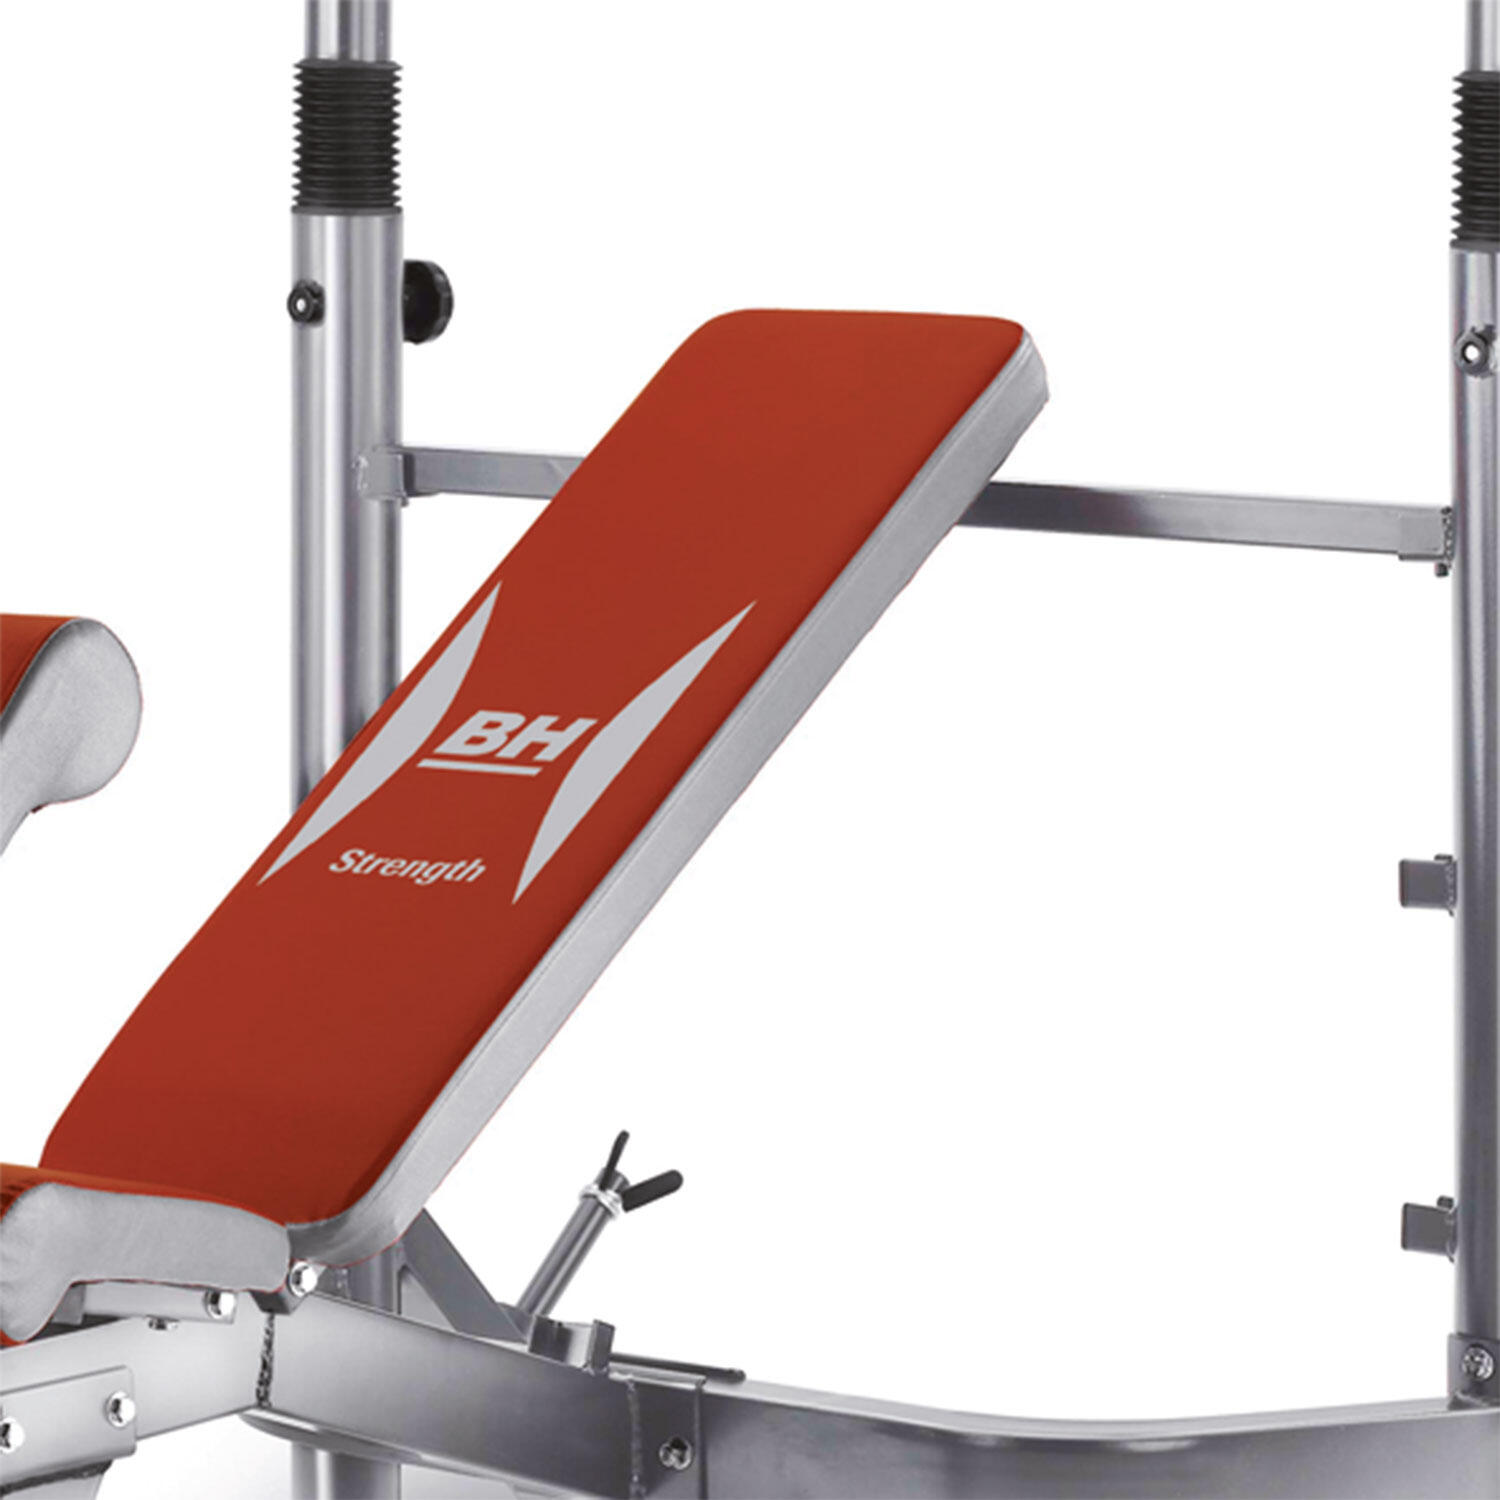 BH FITNESS OPTIMA PRESS G330 WEIGHT BENCH WITH REAR SQUAT RACK 2/7